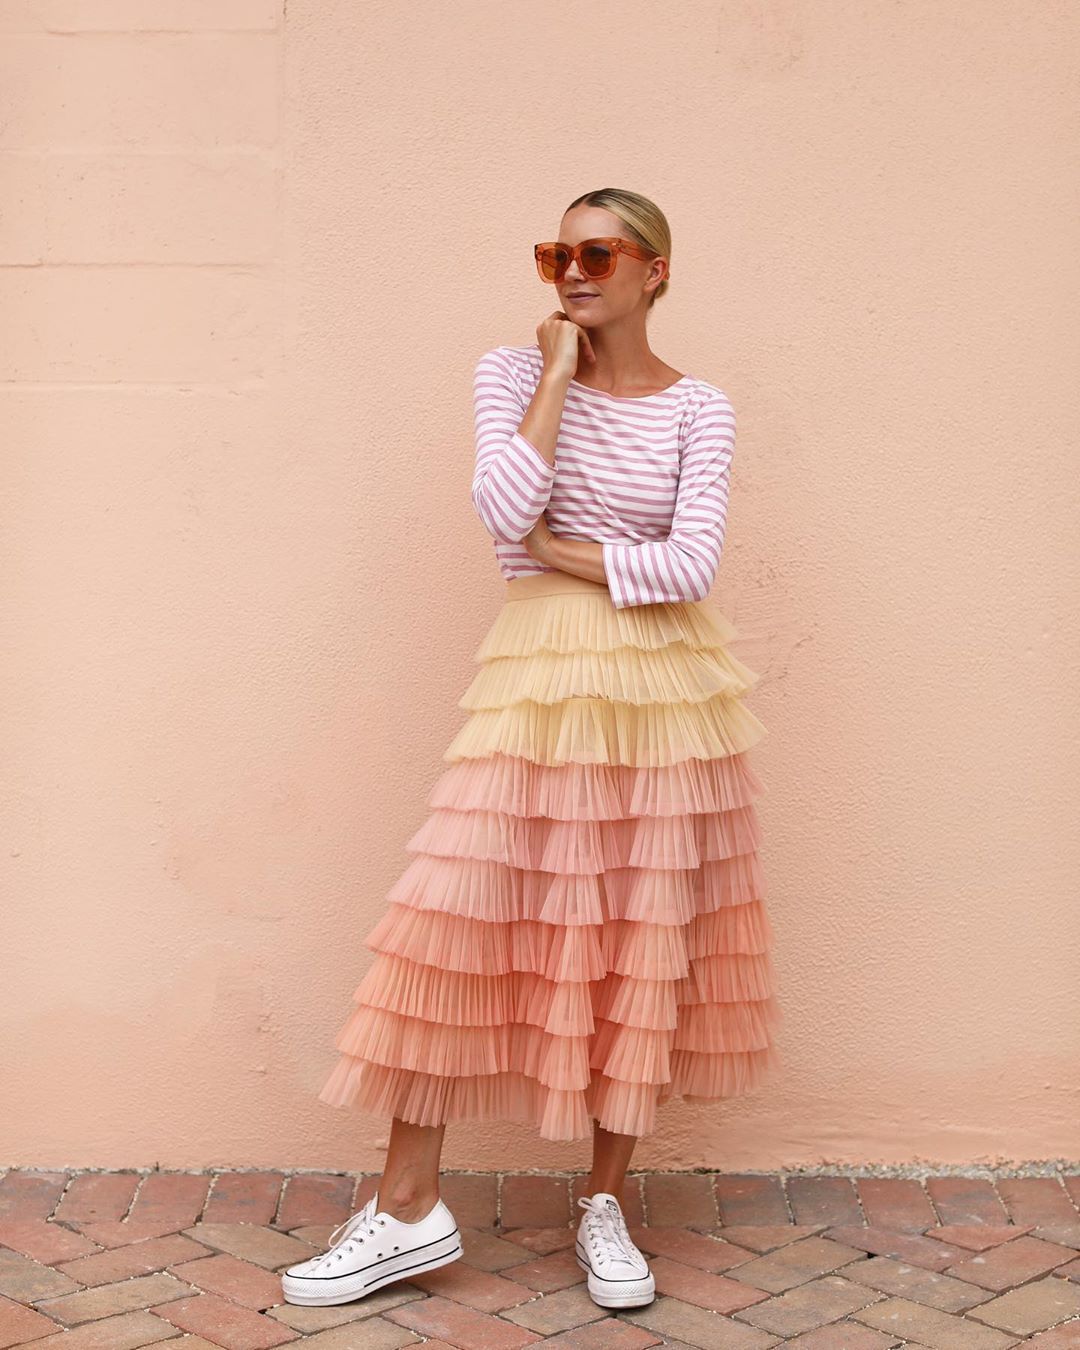 tulle skirt with converse sneakers